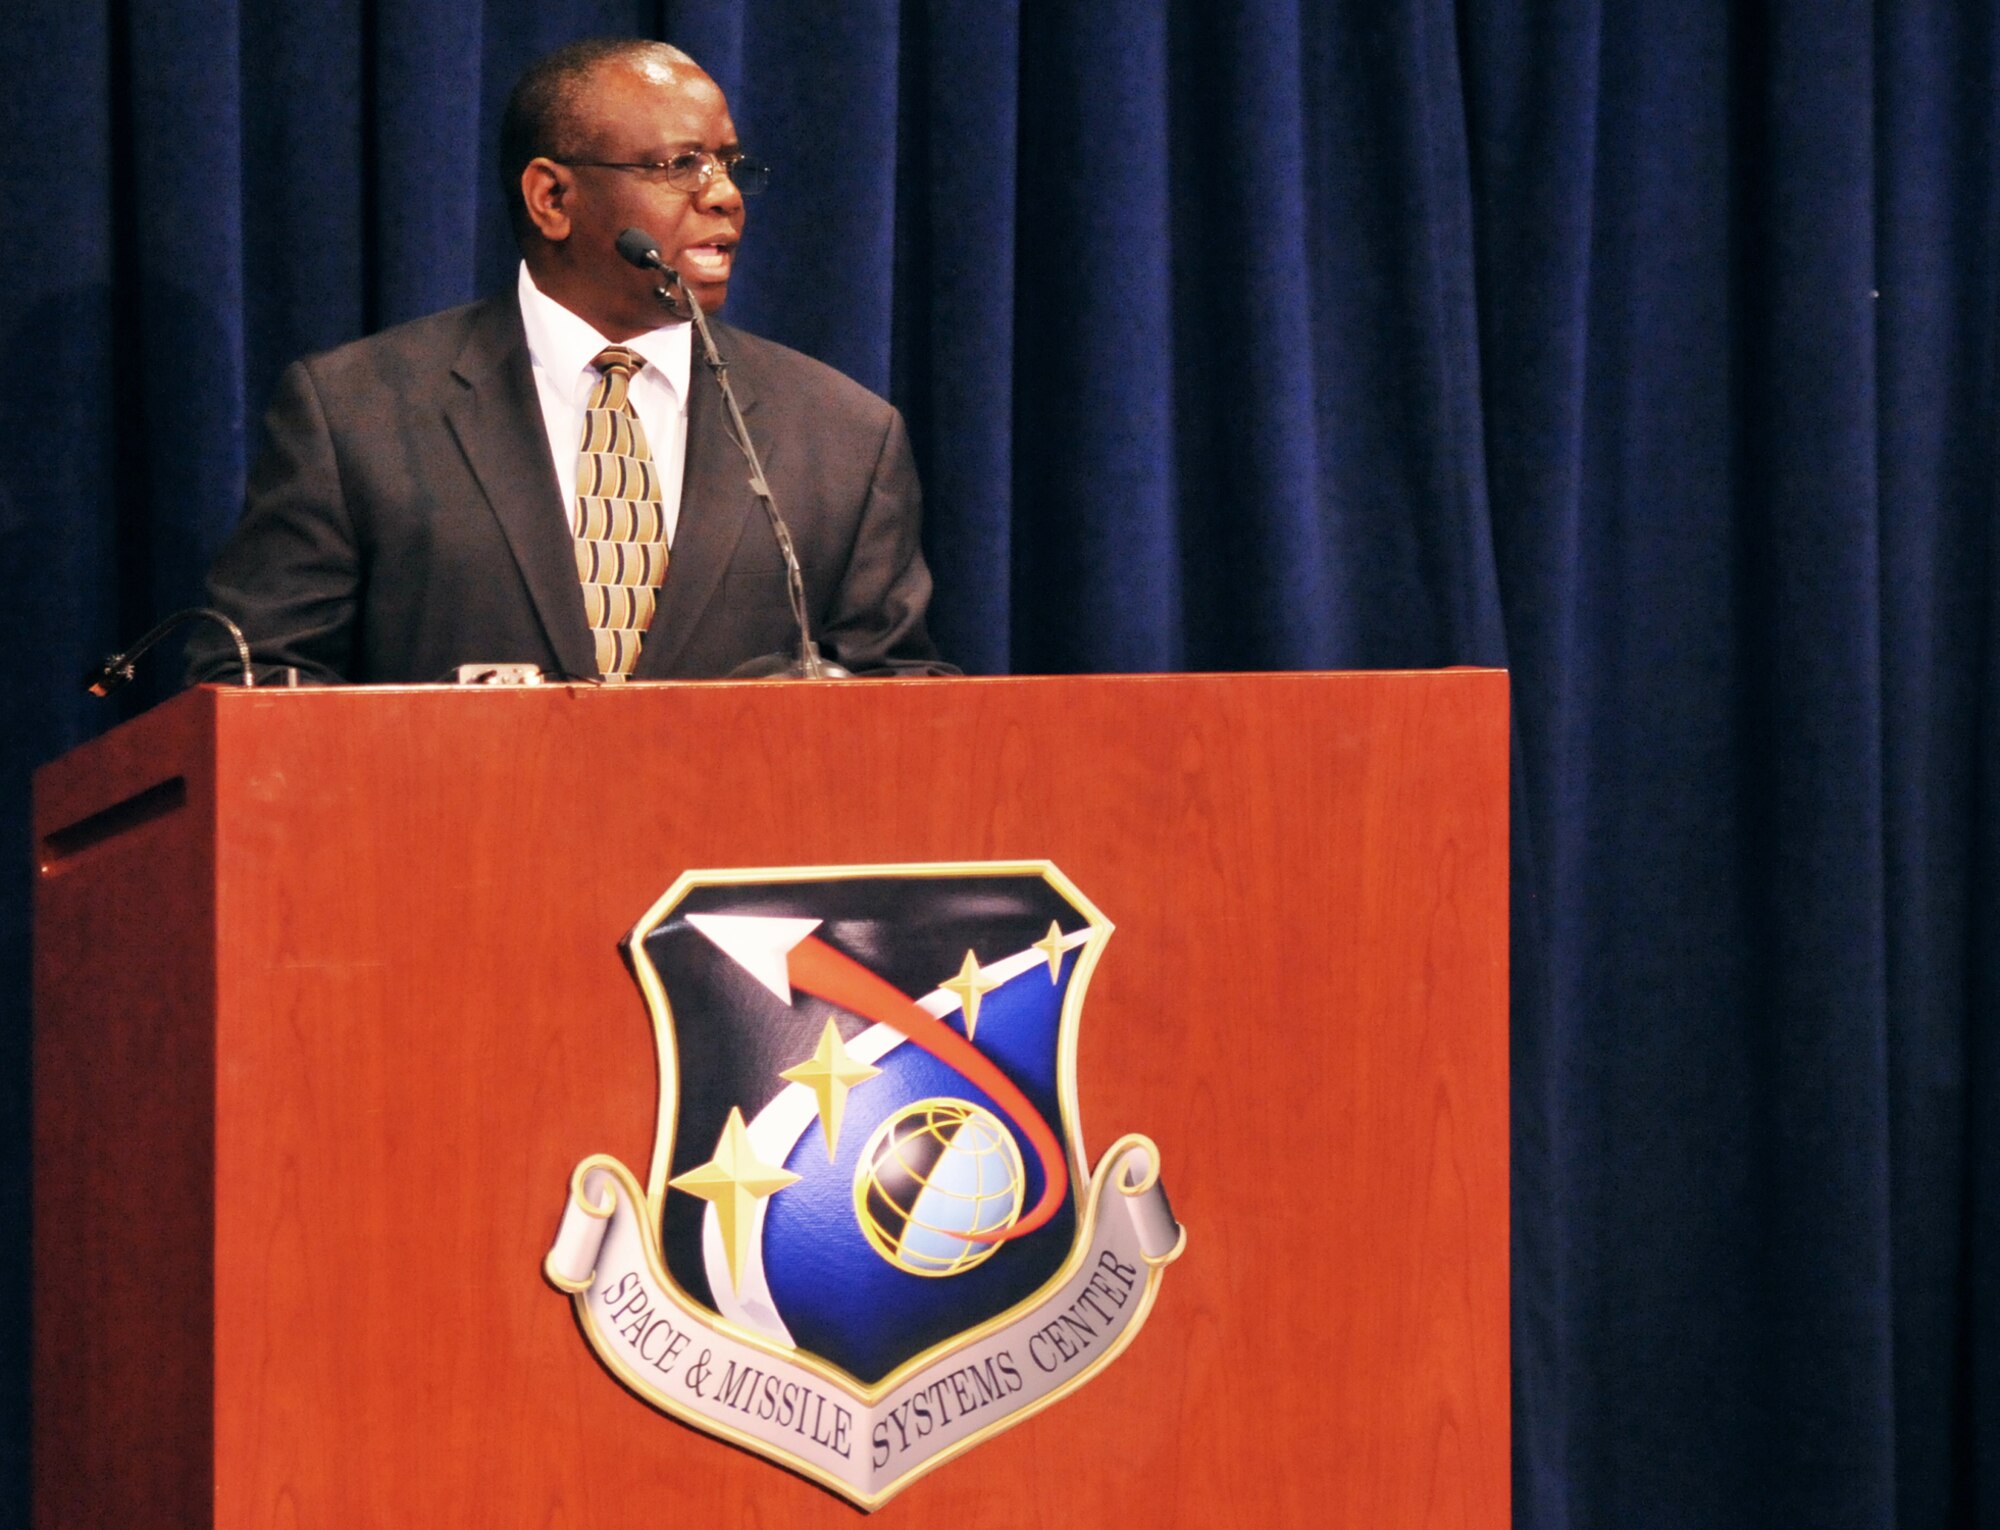 Dr. Munashe Furusa, associate professor of Africana studies at California State University Dominguez Hills, speaks about team work making the dream work during SMC’s MLK observance, Jan.16.   The observance included a reenactment of one of Dr. King’s speeches by Anthony Heard and remarks by Lt. Gen. Ellen Pawlikowski, SMC commander, and Dr. Wayne Goodman, Aerospace Corporation’s vice president of Space Program Operations. (Photo by Sarah Corrice)